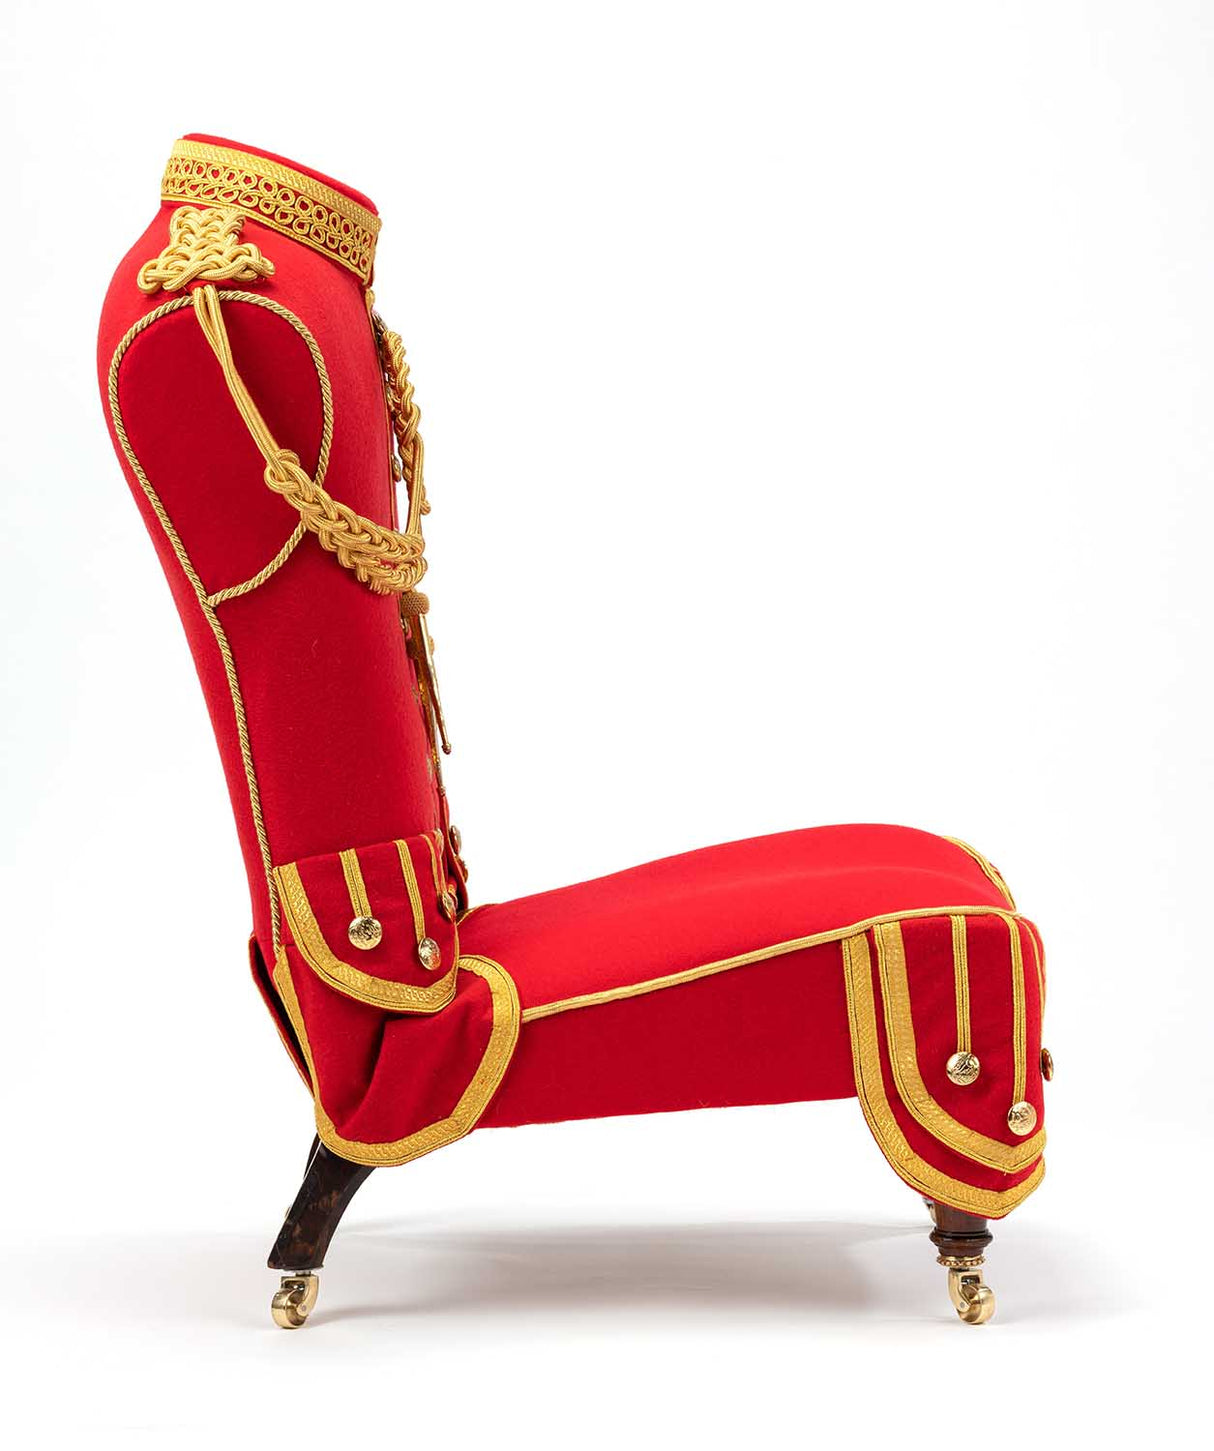 THE MAHARAJA Pipers Military Musicians Tunic Chair